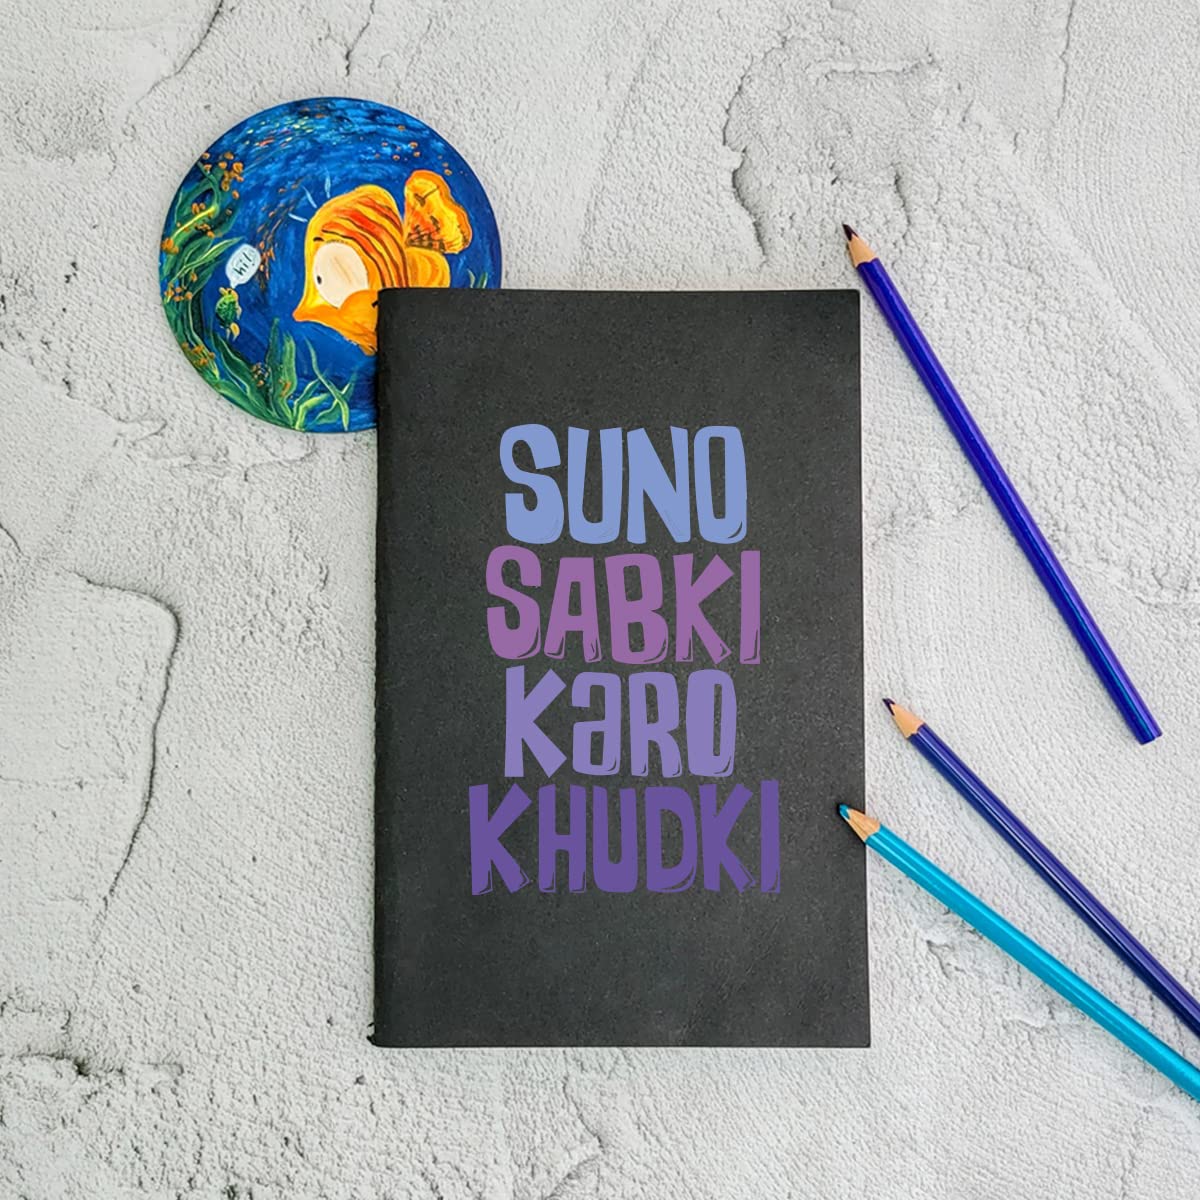 Suno Sabki Karo Khudki - Black A5 Doodle Notebook - Kraft Cover Notebook - A5 - 300 GSM Kraft Cover - Handmade - Unruled - 80 Pages - Natural Shade Pages 120 GSM - Funny Quotes & Quirky, Funky designs